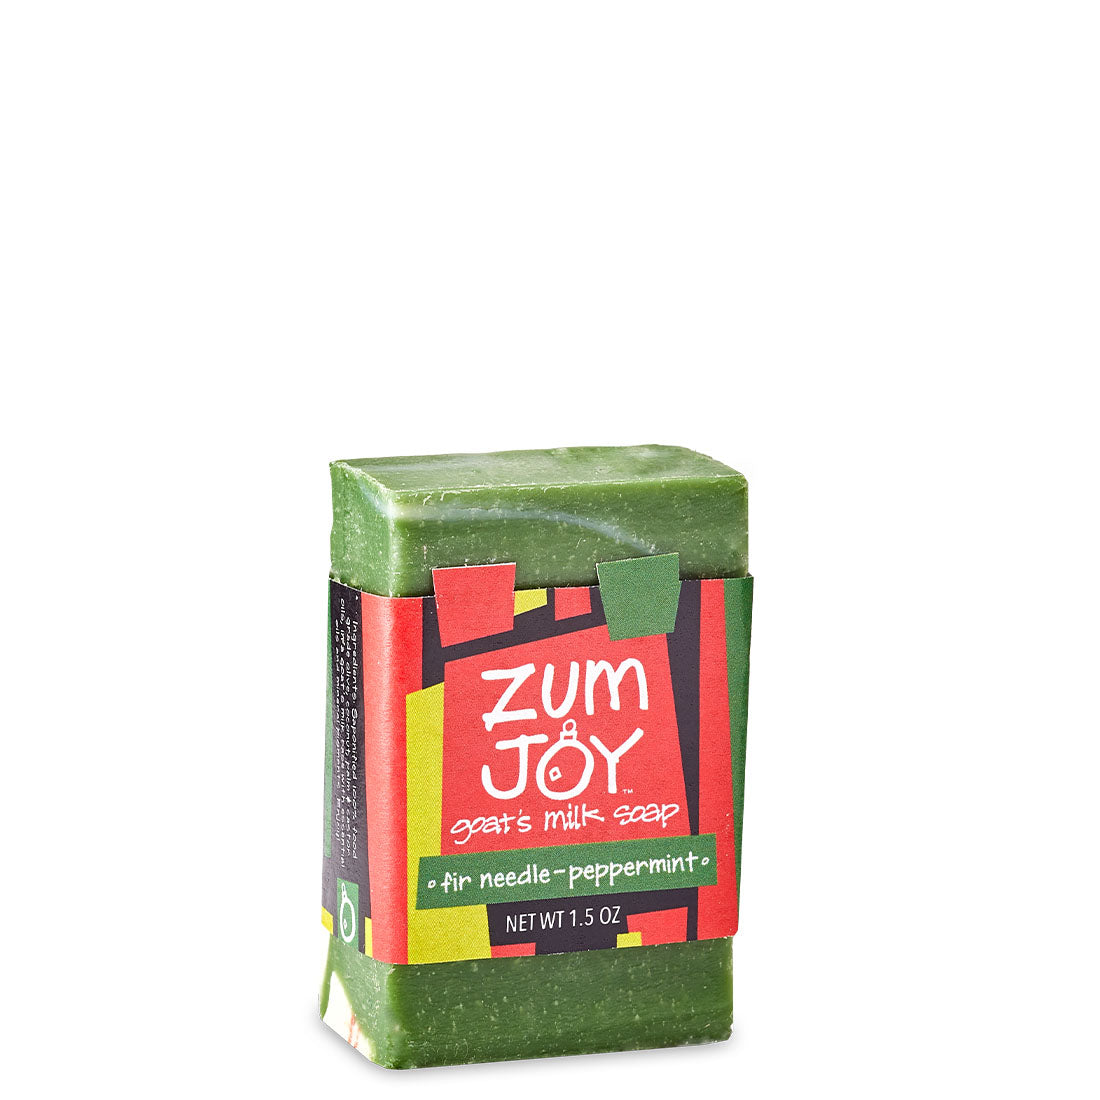 Mini labeled Zum Joy Bar with green coloring and mint scent.